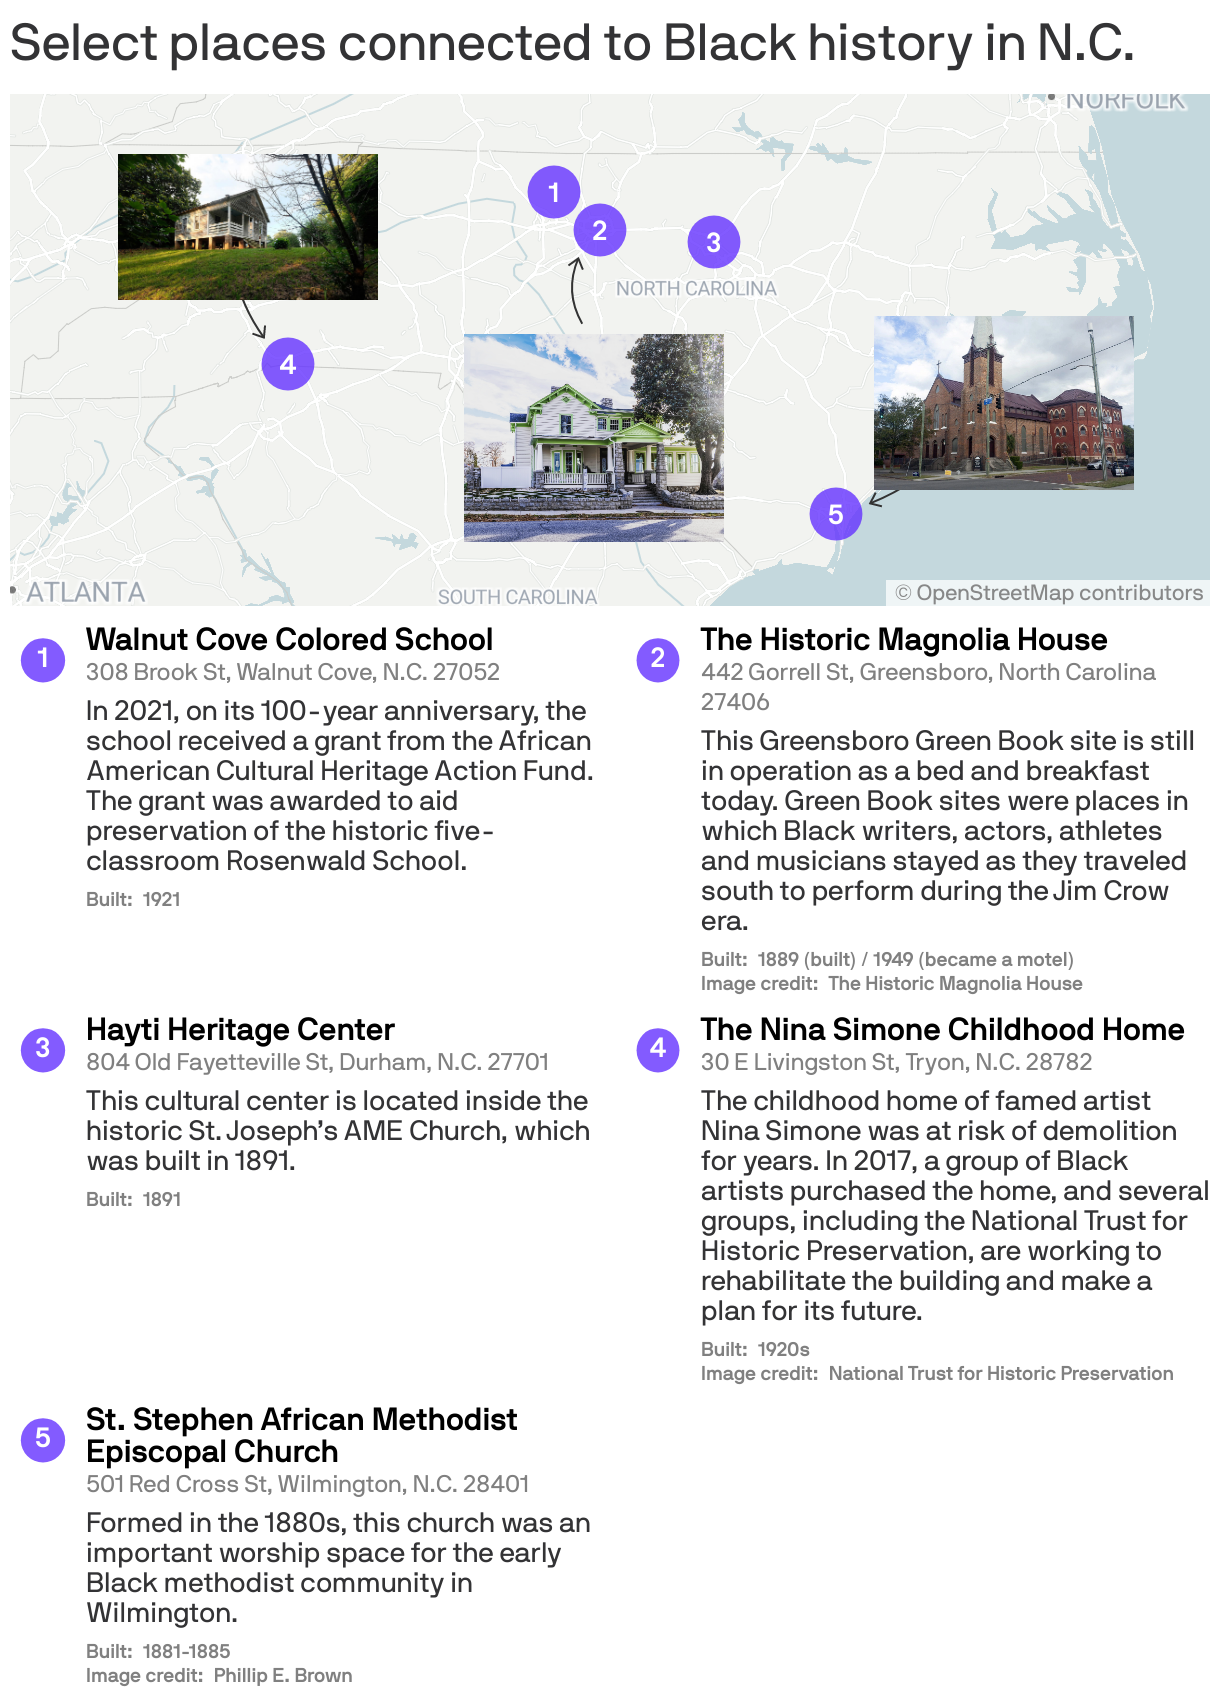 Select places connected to Black history in N.C.